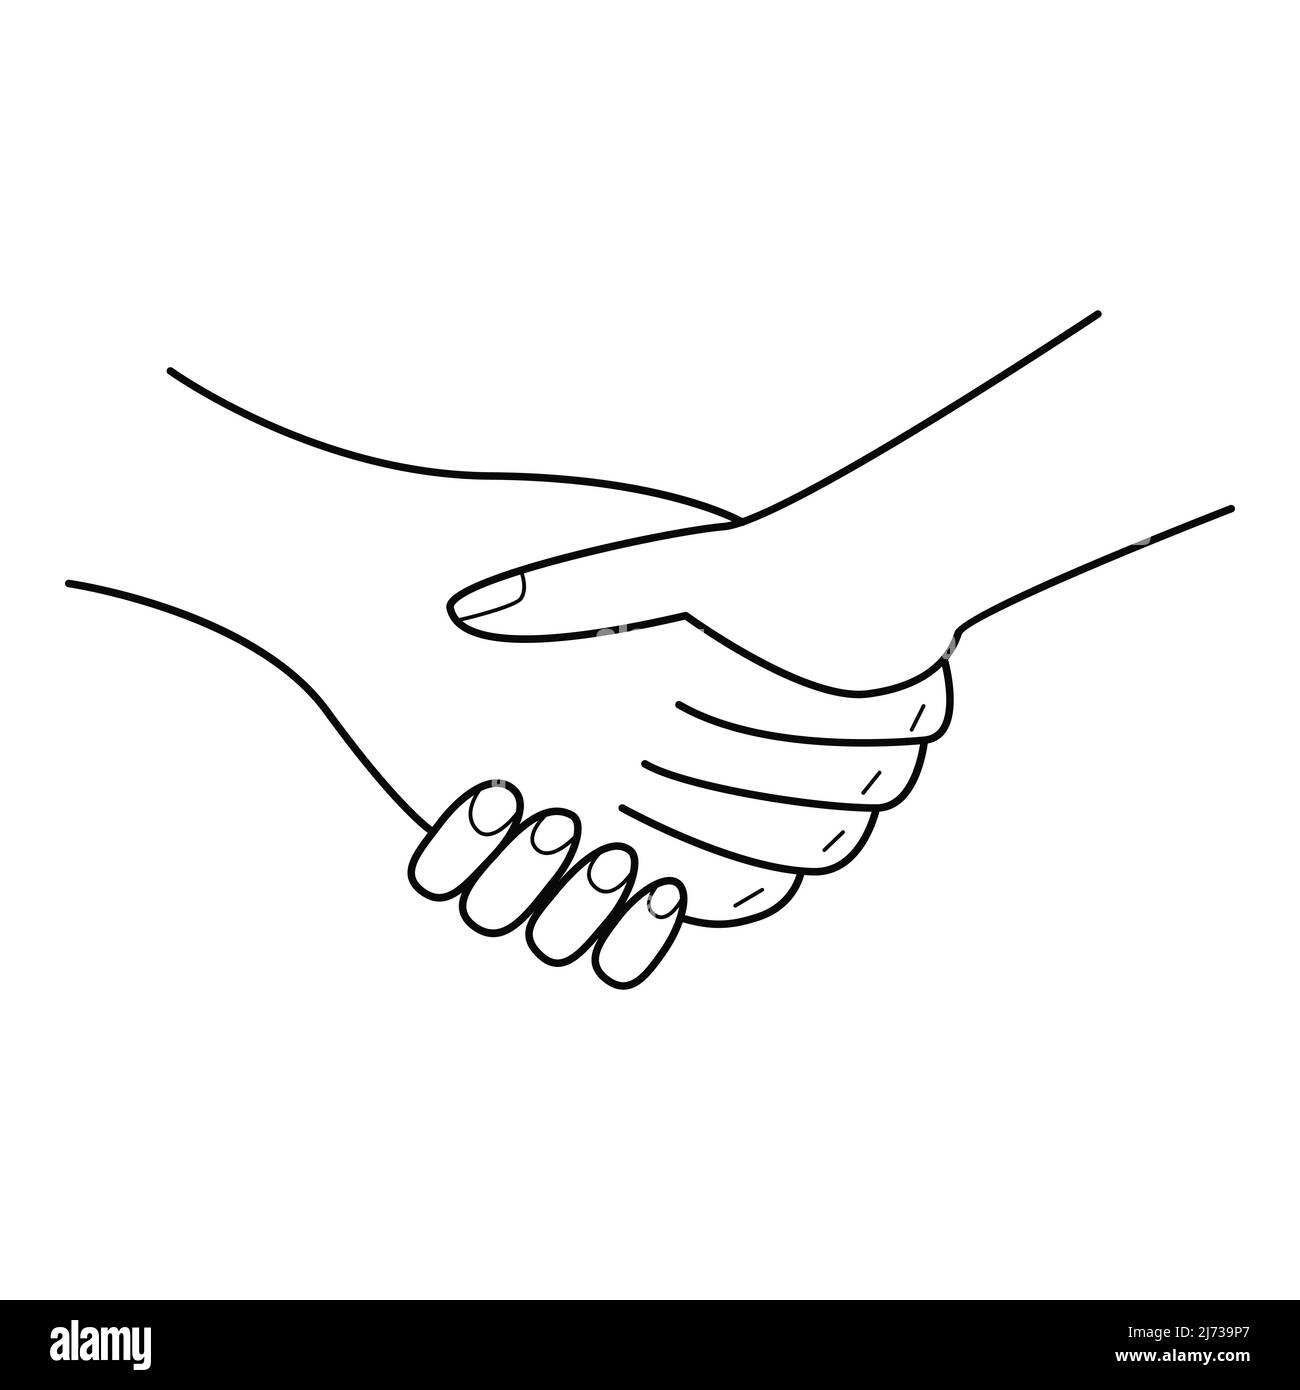 The hand shakes the hand. A handshake gesture. A symbol of the conclusion of a contract, transaction, consent, greeting. Hand-drawn black and white ve Stock Vector